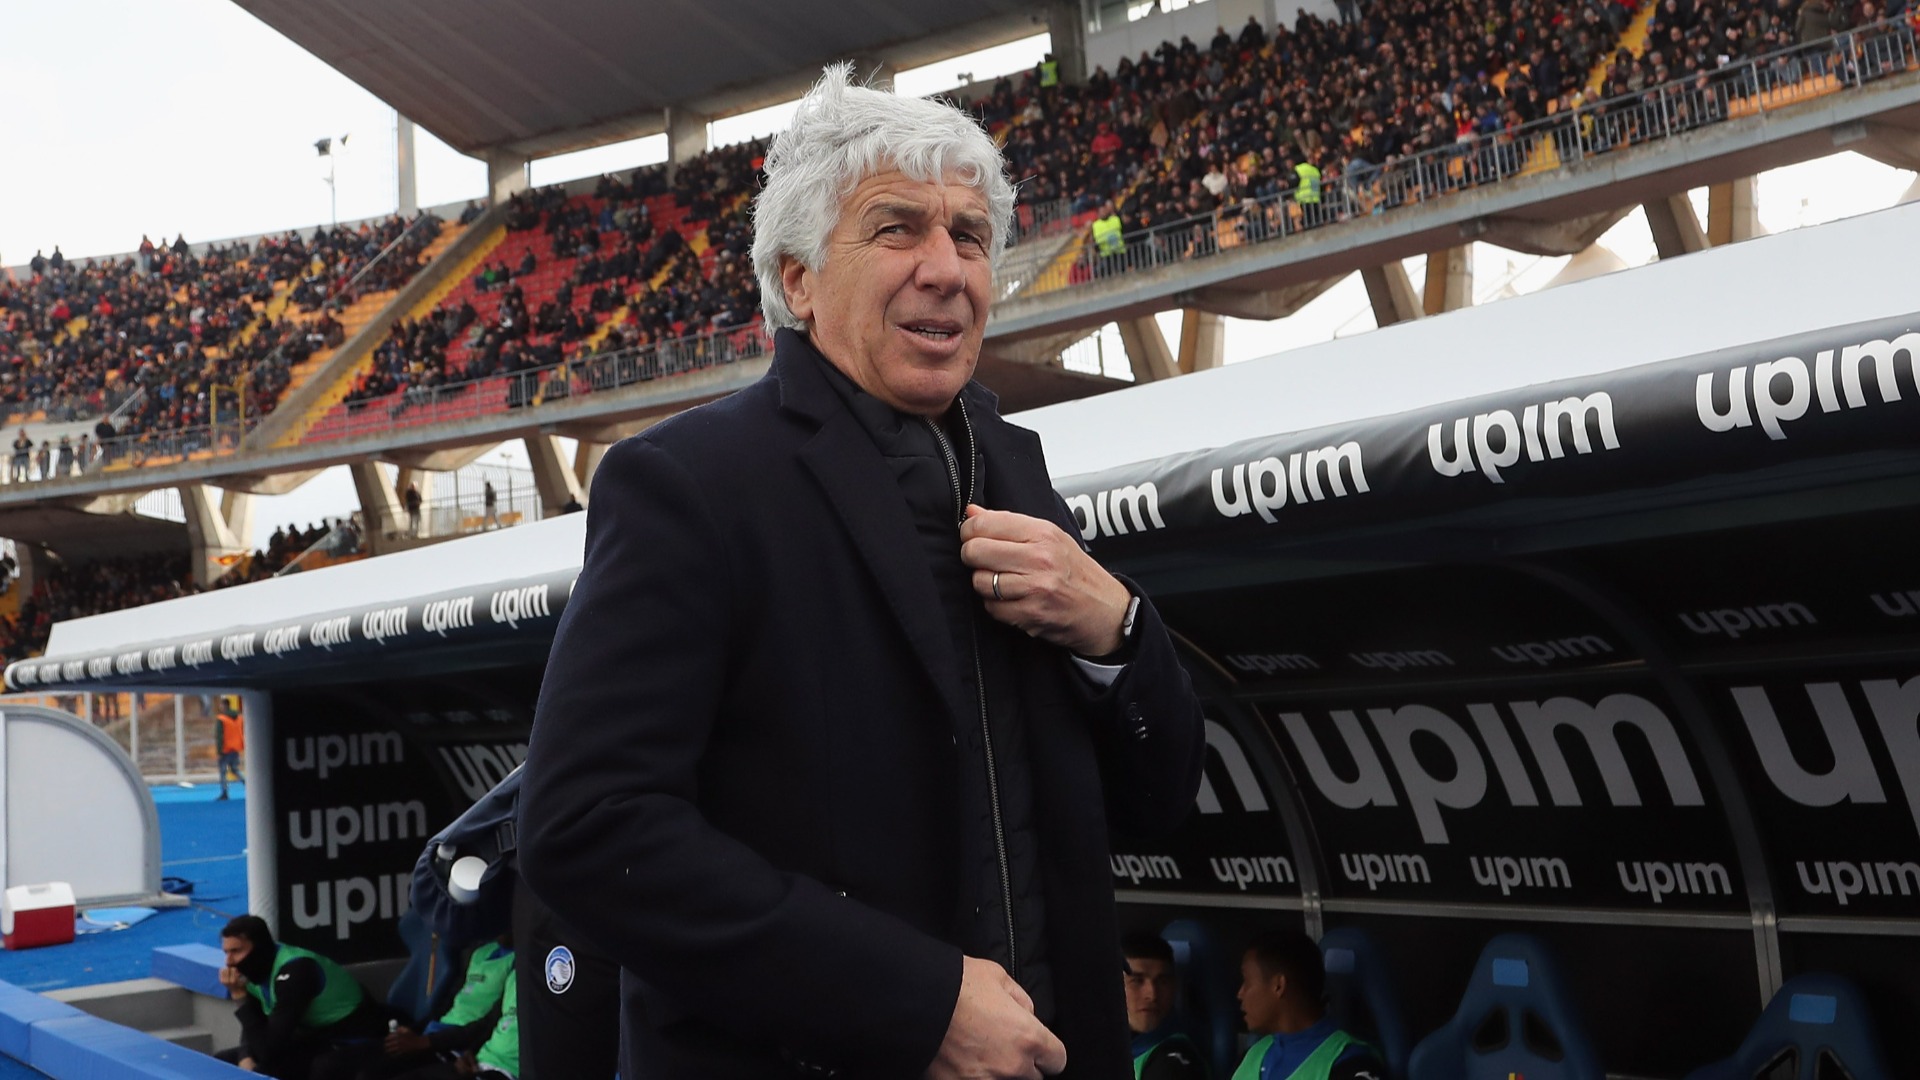 Valencia were concerned Gian Piero Gasperini "put at risk numerous people", but the Atalanta head coach has the support of his owner.